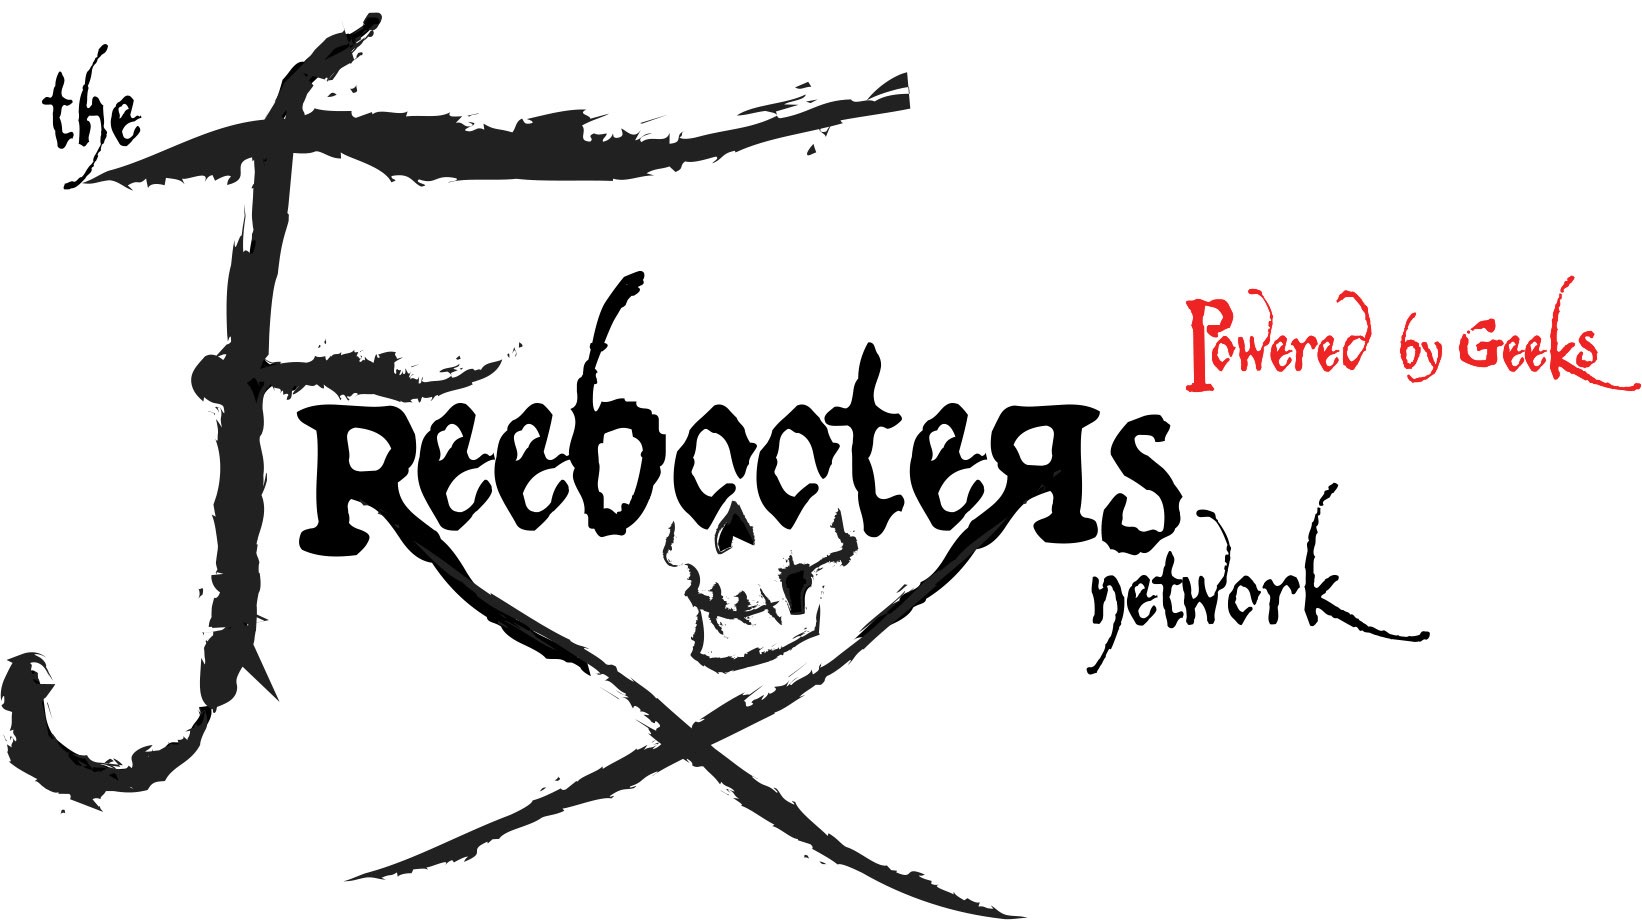 Introducing the Freebooter’s Network